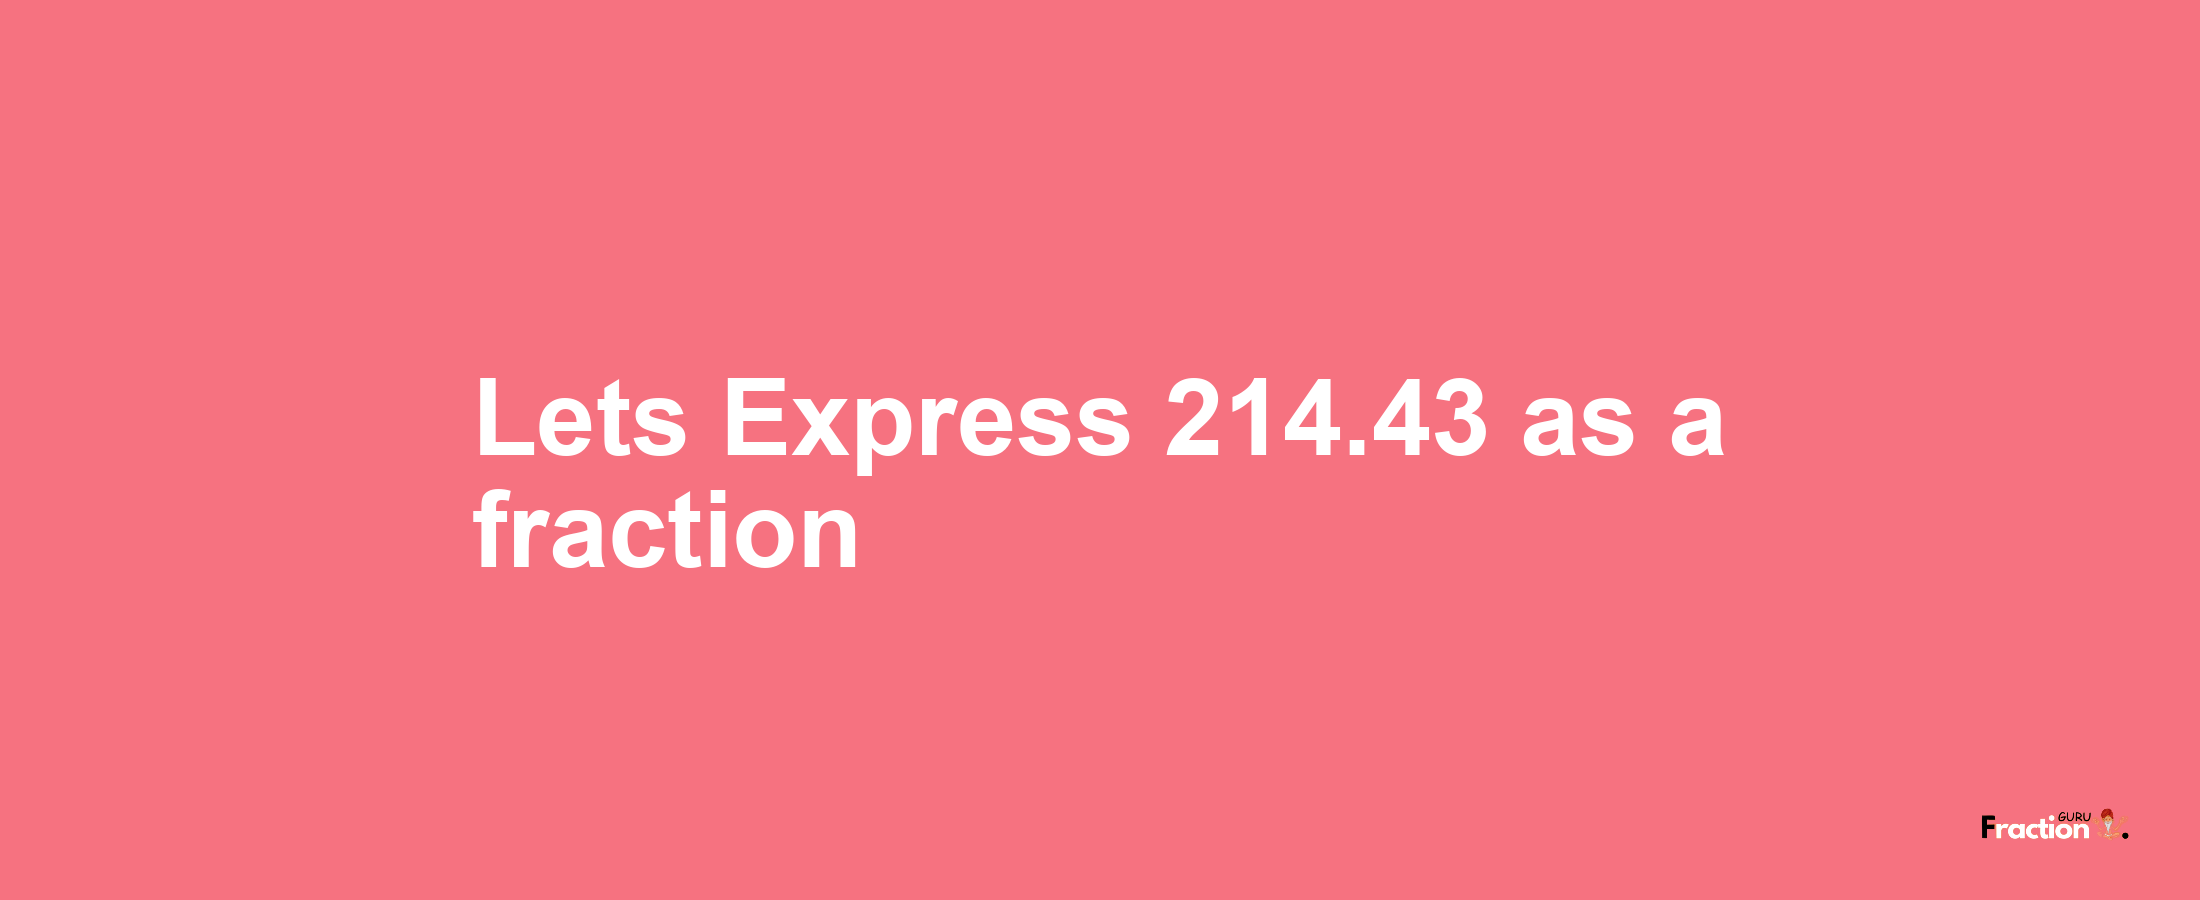 Lets Express 214.43 as afraction